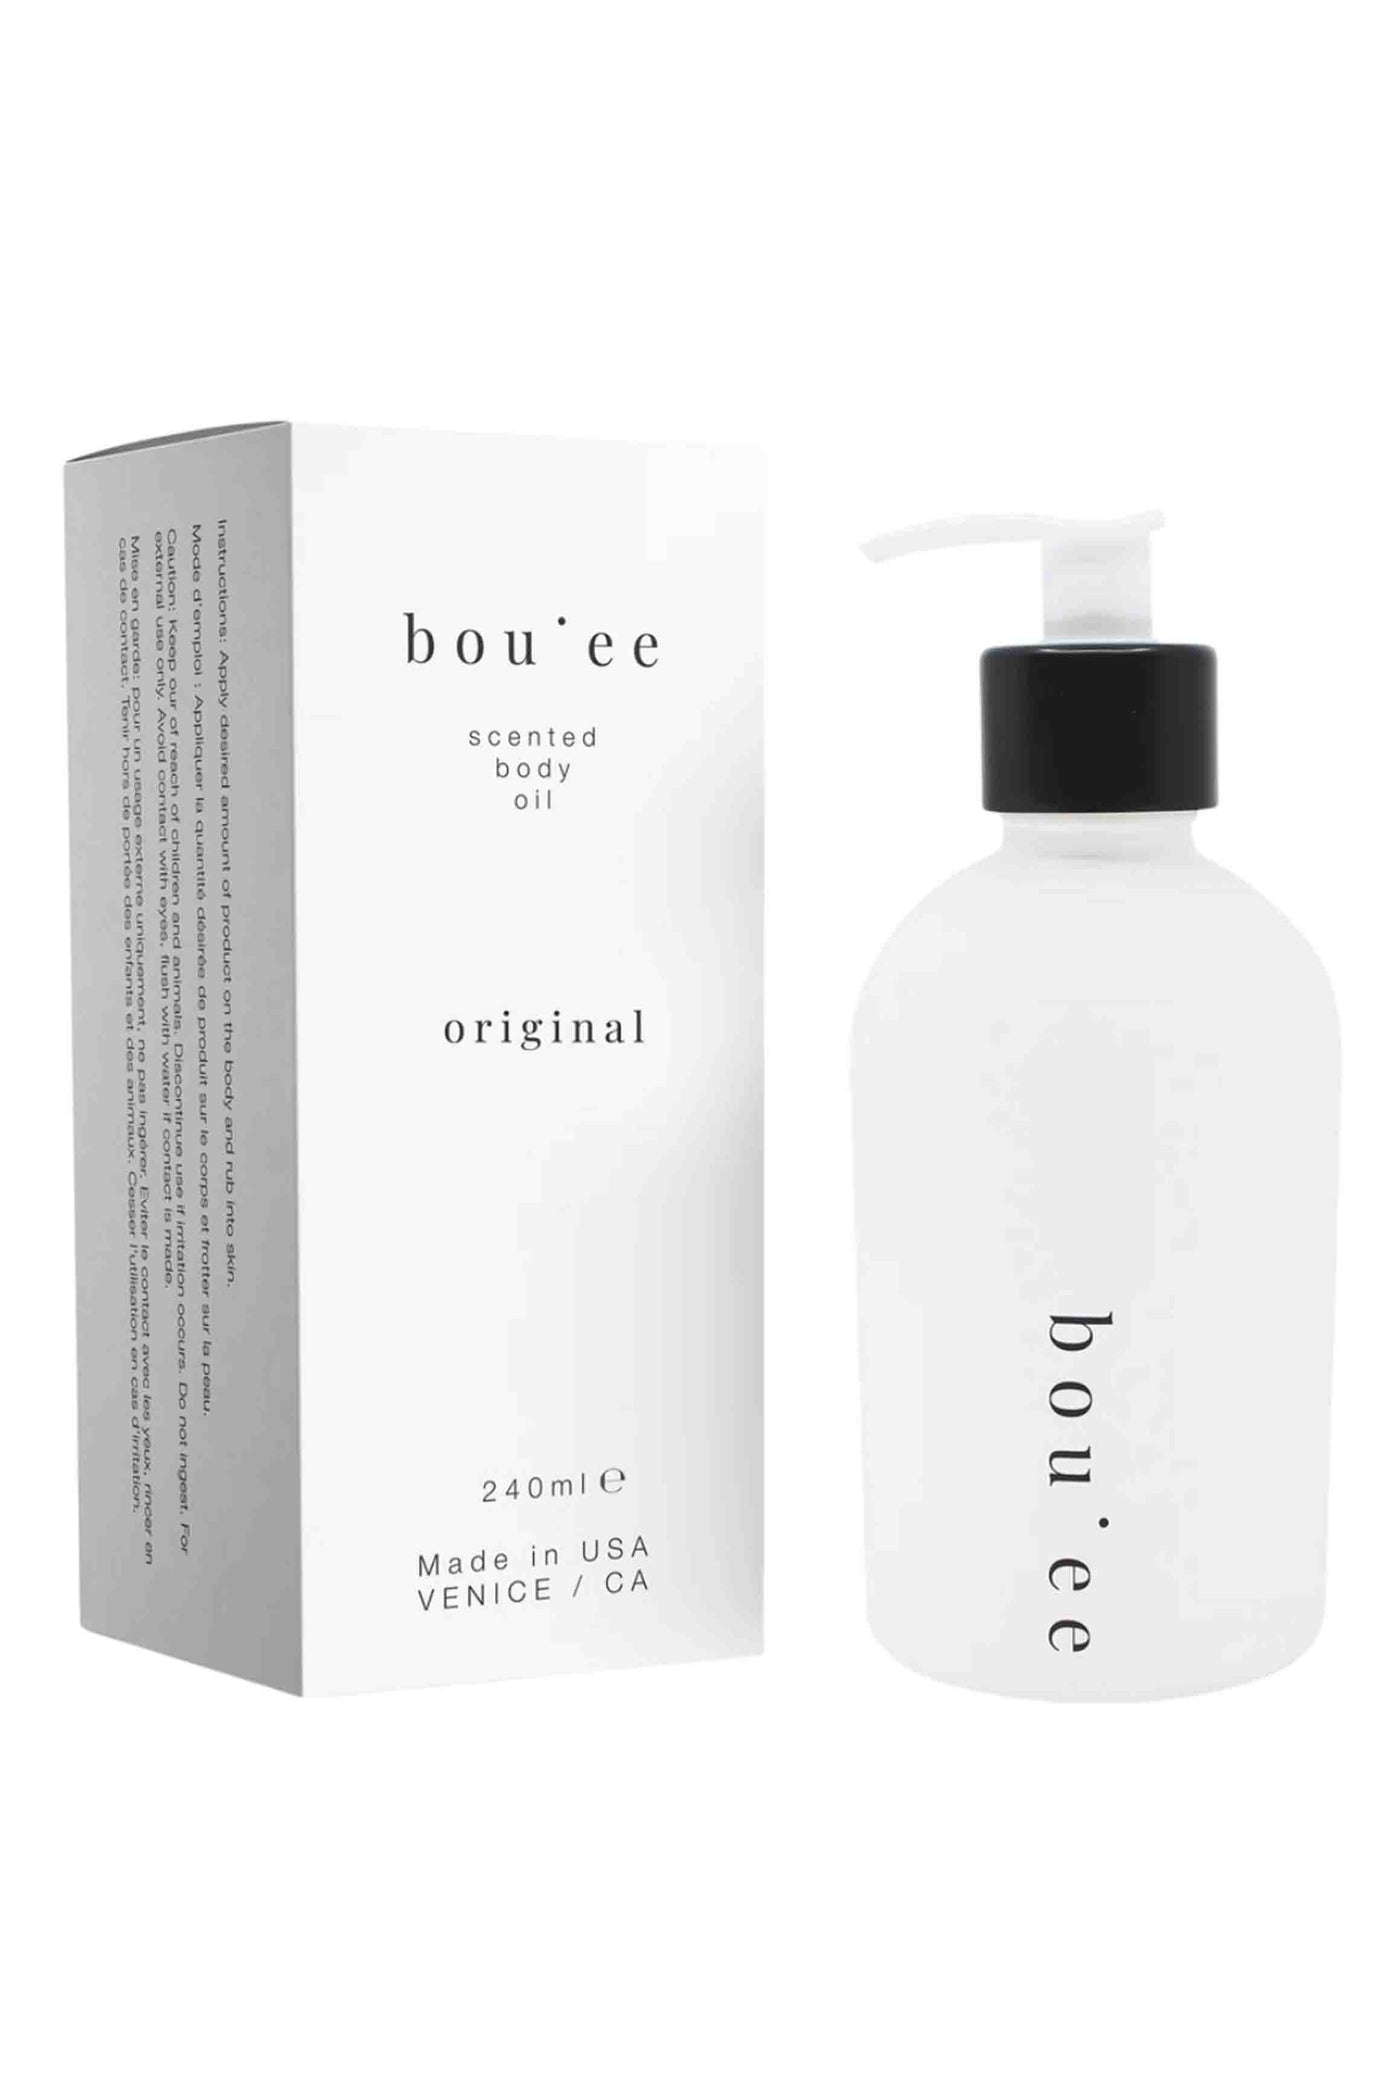 Original Boujee Body Oil by Riddle Oil